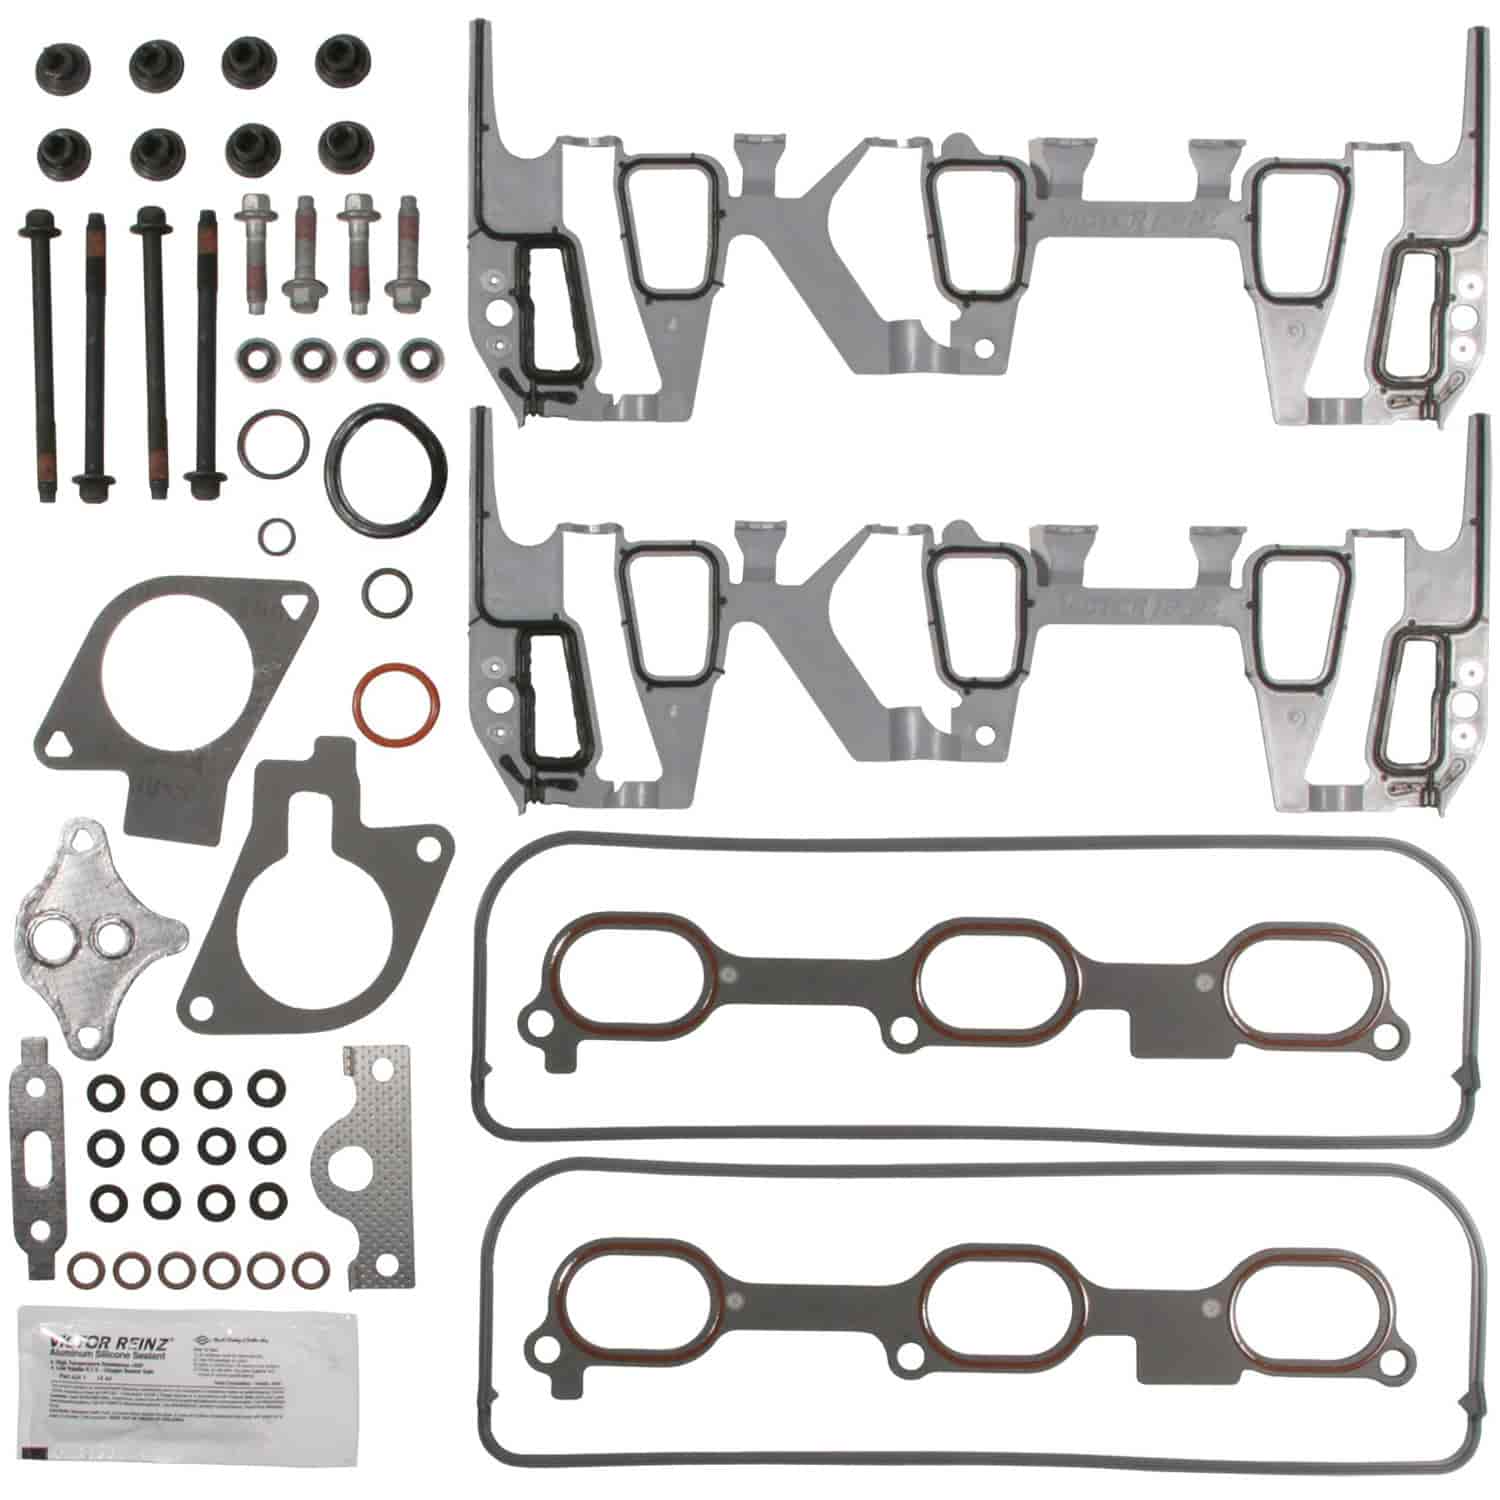 Intake Manifold Installation Kit 1996-2005 Buick/Chevy/Olds/Pontiac with V6 3.1/3.4L Includes Intake Bolts